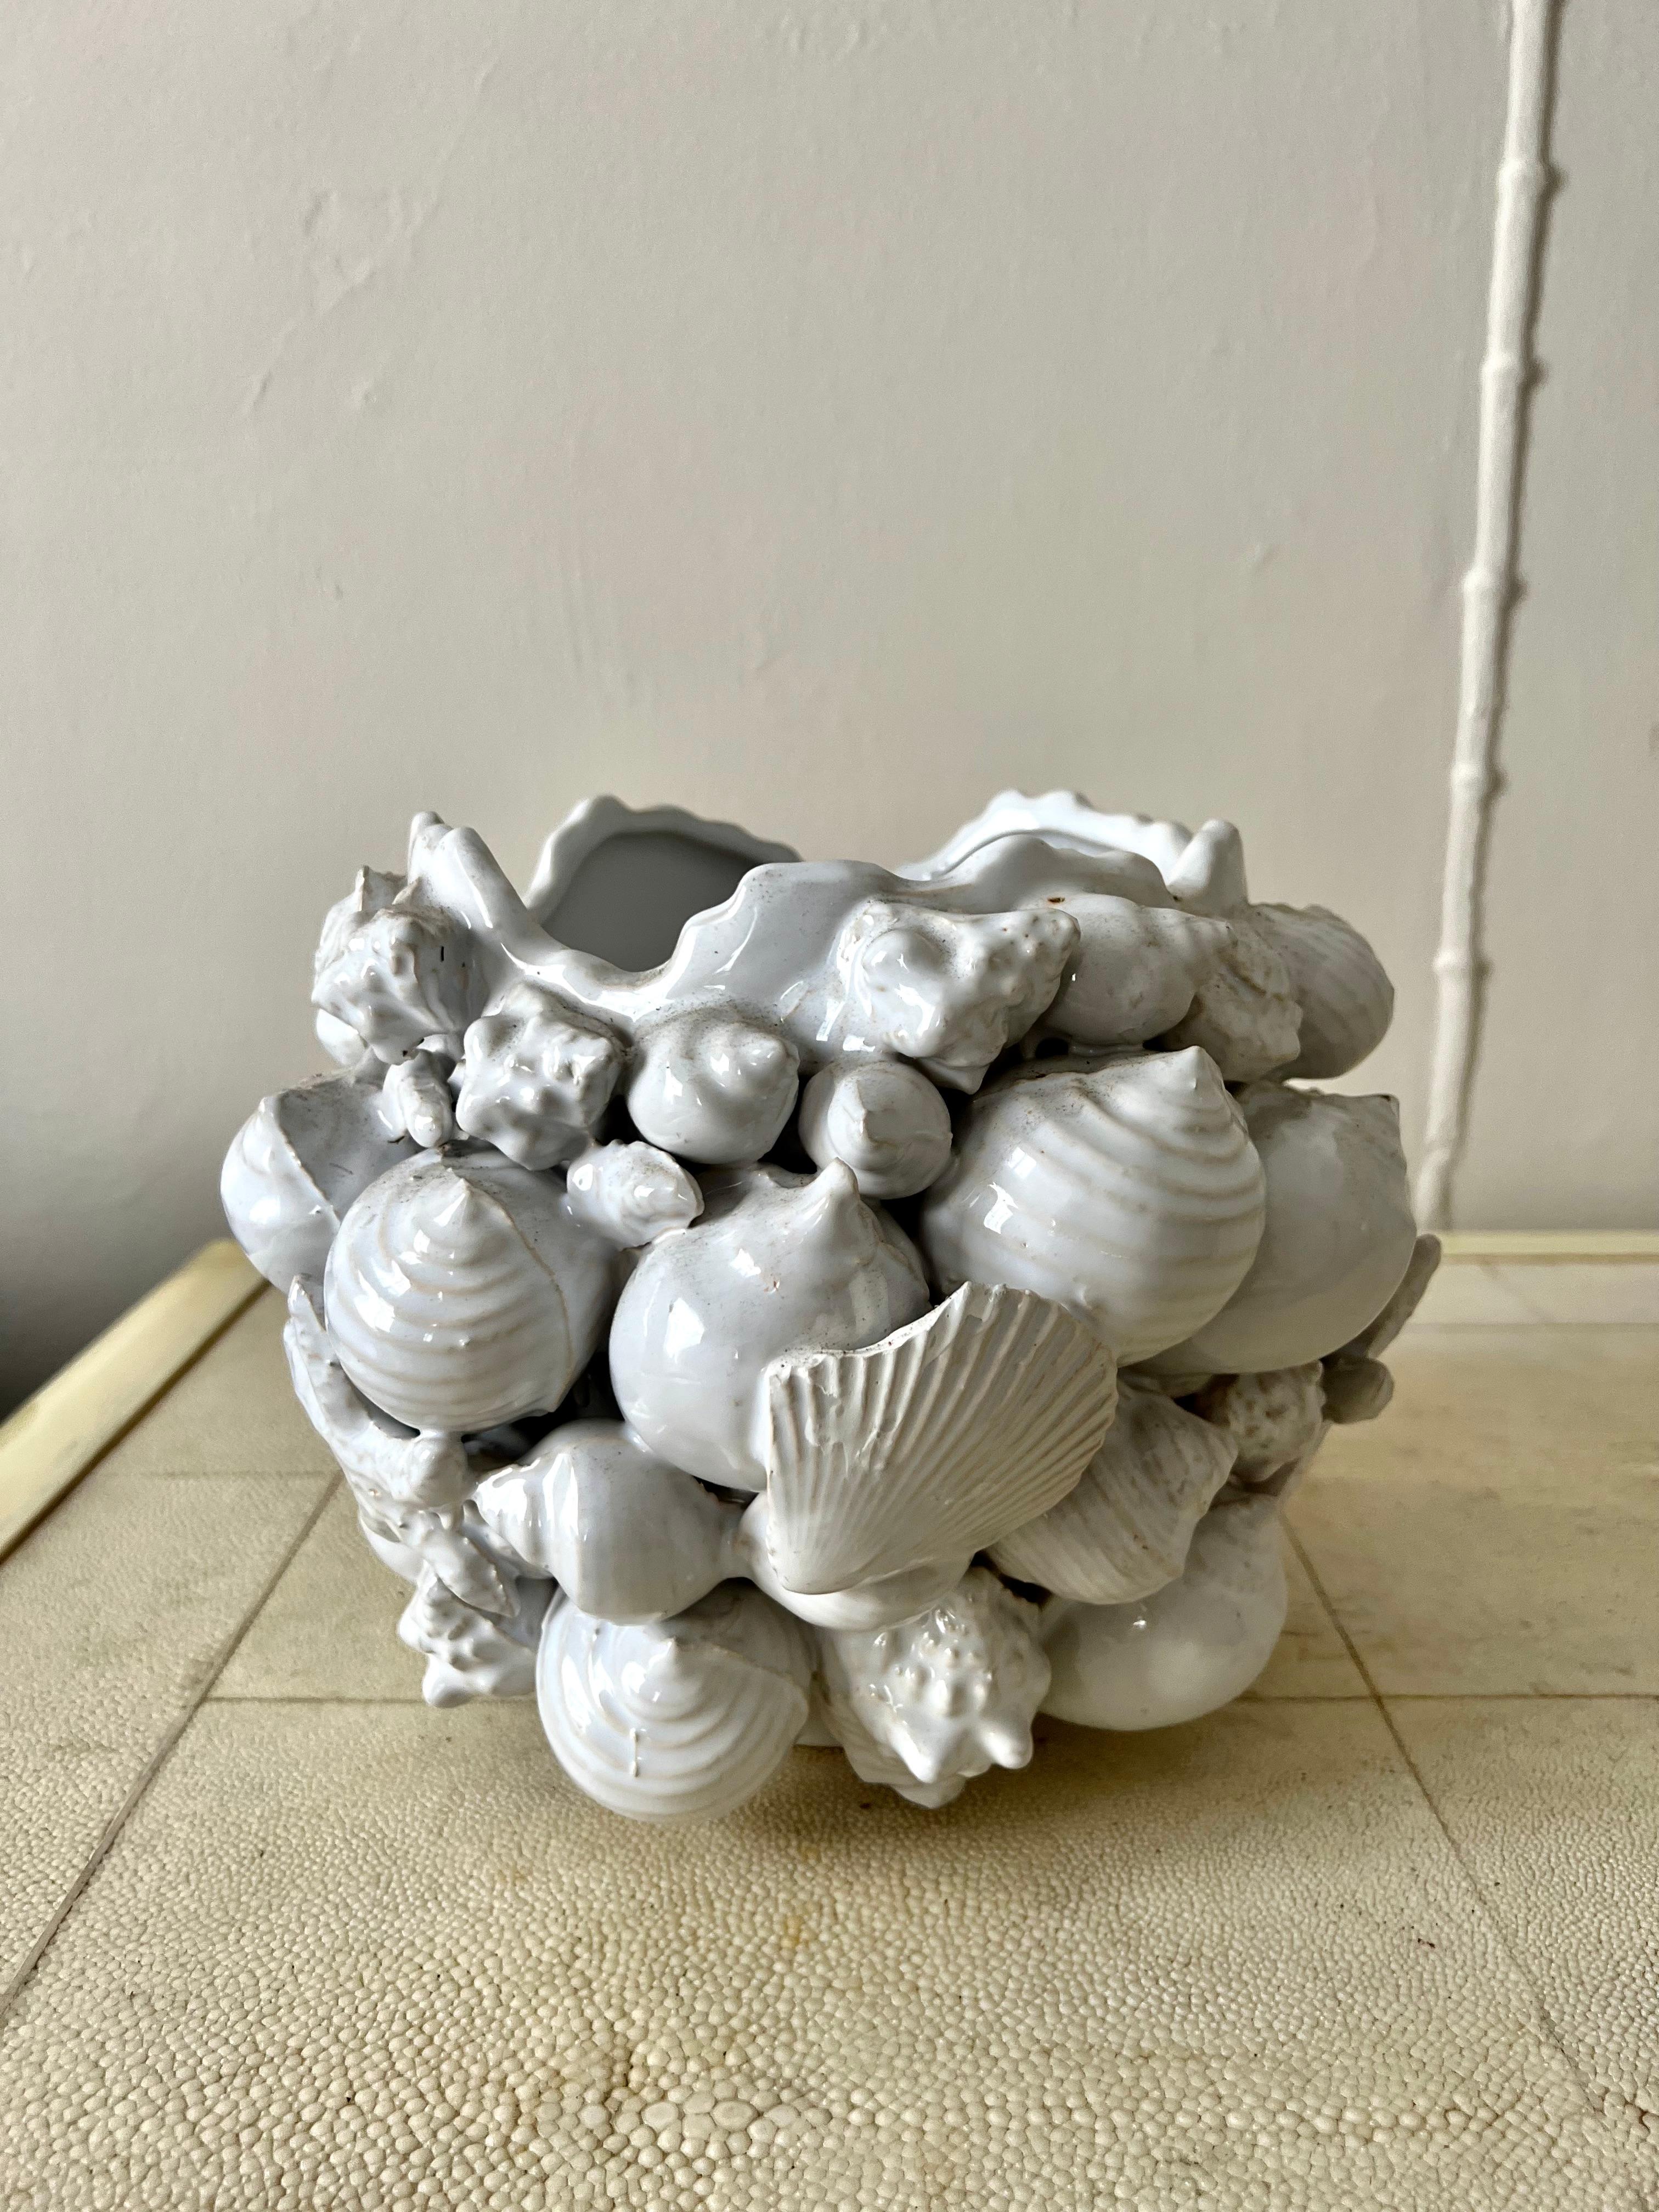 A wonderful white ceramic or porcelain planter. Appropriate for either indoors our out, on a shelf or on the patio... the piece is a compliment to many settings, especially a beach theme. While the piece would be great for plants, it does not have a